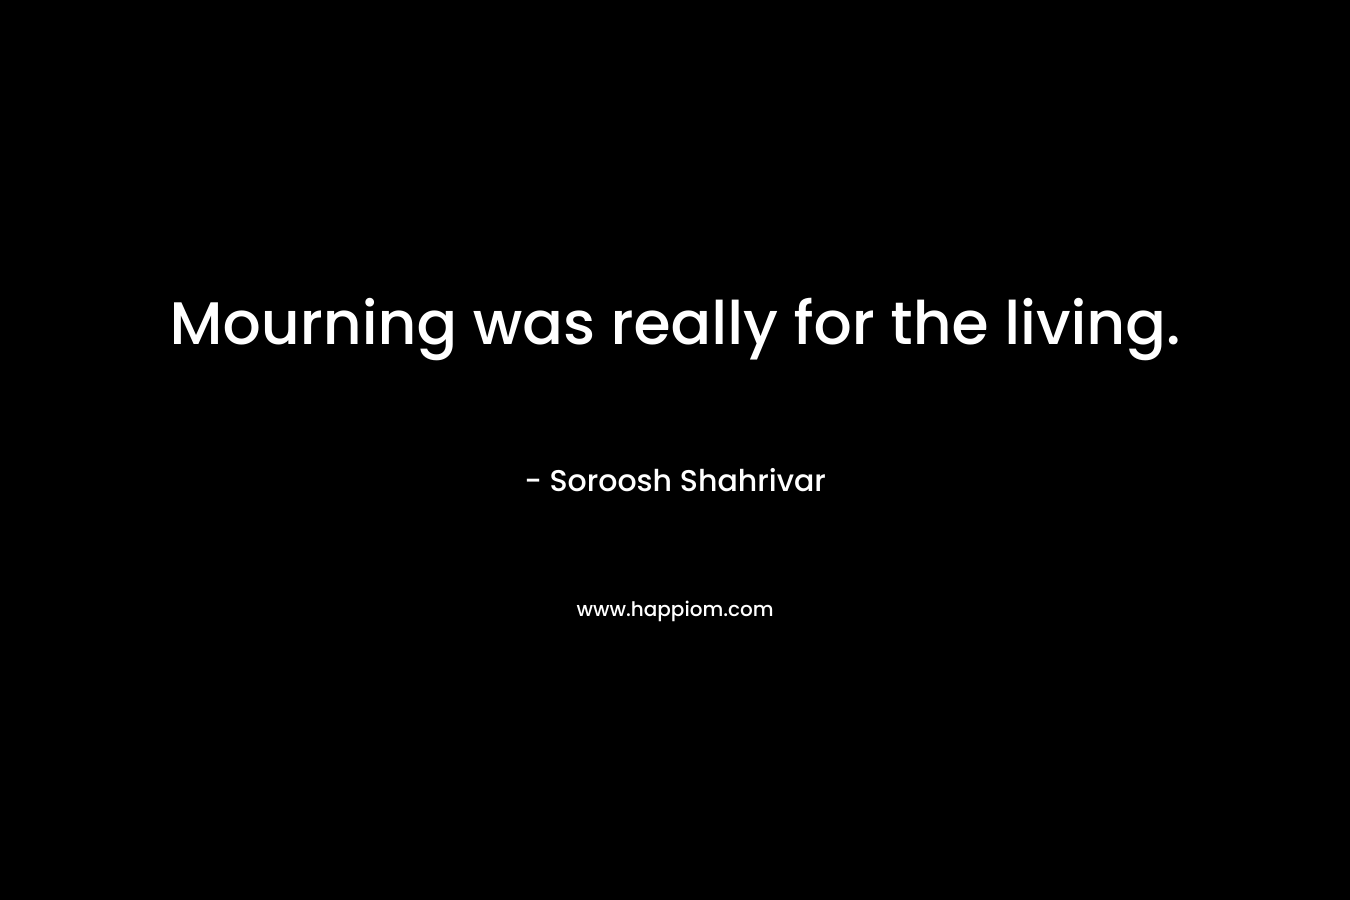 Mourning was really for the living. – Soroosh Shahrivar